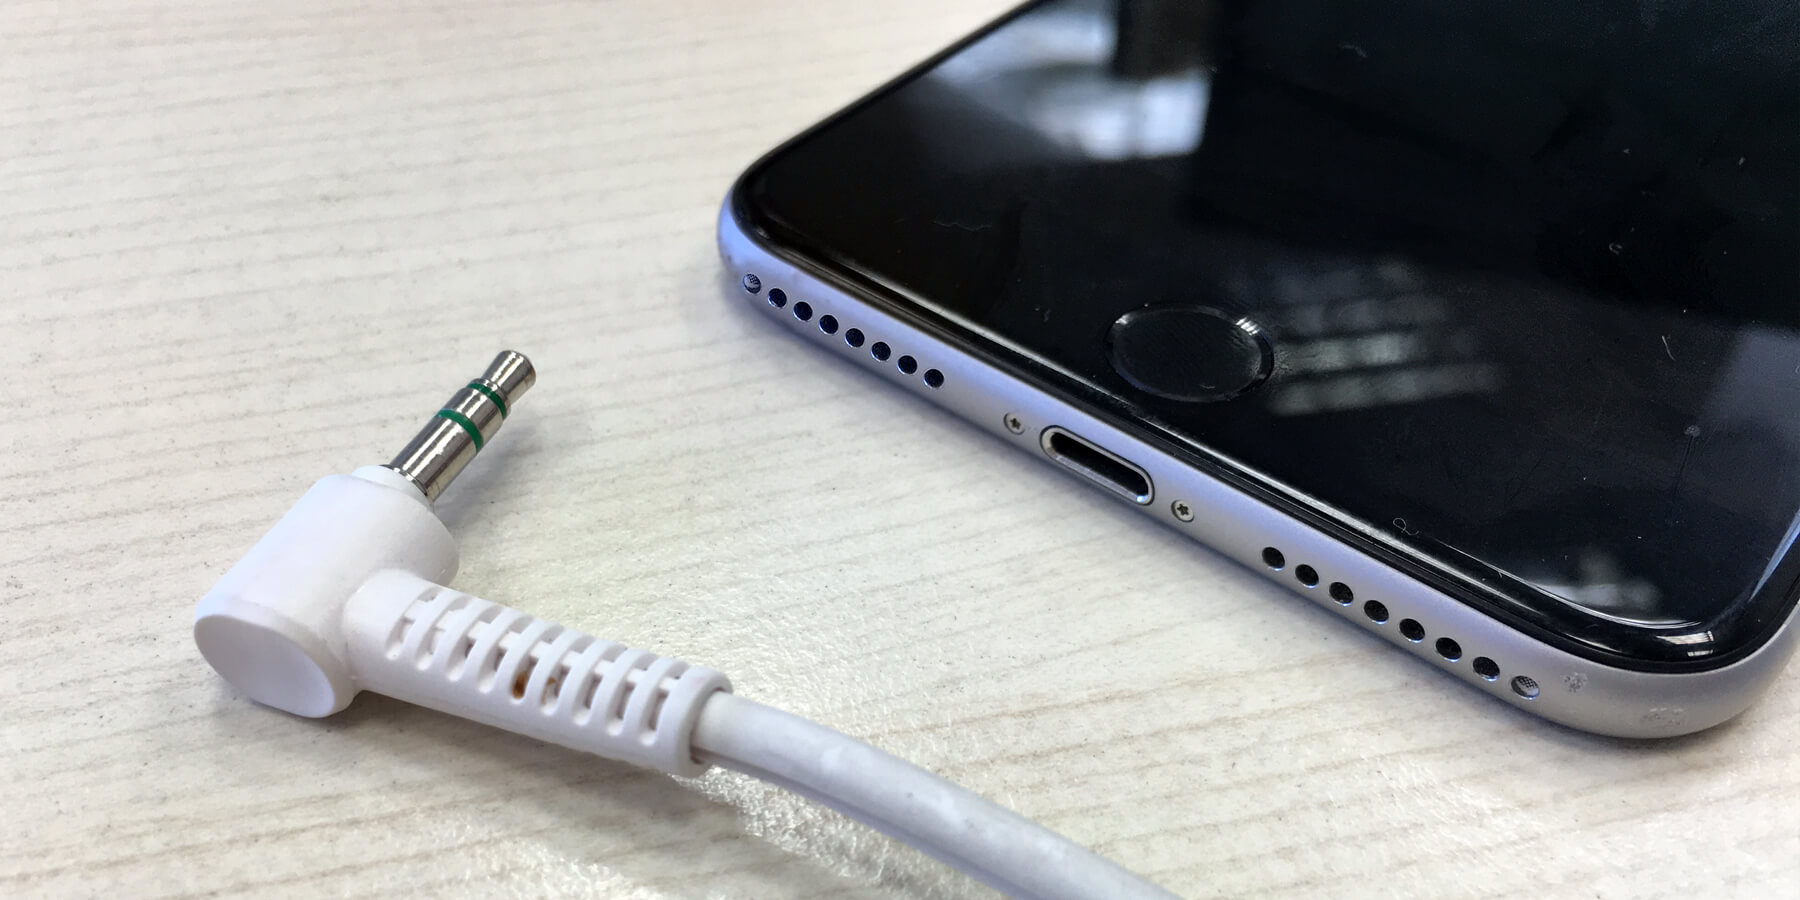 where-to-plug-in-earbuds-on-iphone-11